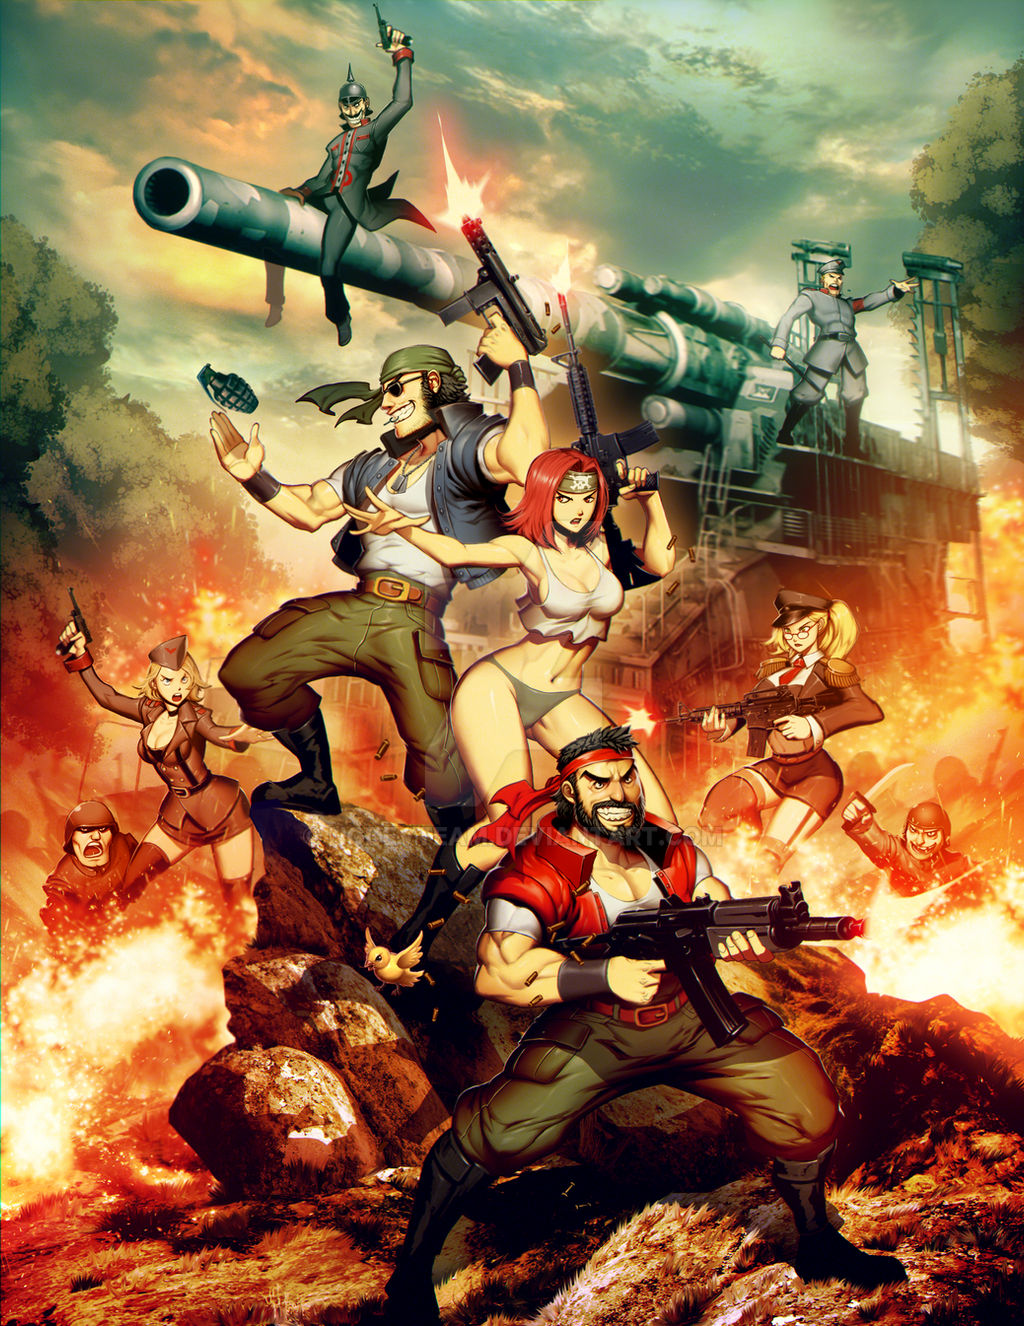 3girls 5boys aiming angry bandana batlle beard bikini blonde_hair boots cannon character_request clenched_teeth cloud cover explosive facial_hair fire firing genzoman germany grenade grin gun handgun helmet highres jolly_roger knife kraut_busters manly mercenary military military_uniform multiple_boys multiple_girls mustache necktie neo_geo officer official_art promotional_art red_hair rock shouting smile soldier submachine_gun sunglasses swimsuit tank_top teeth uniform vest video_game_cover weapon